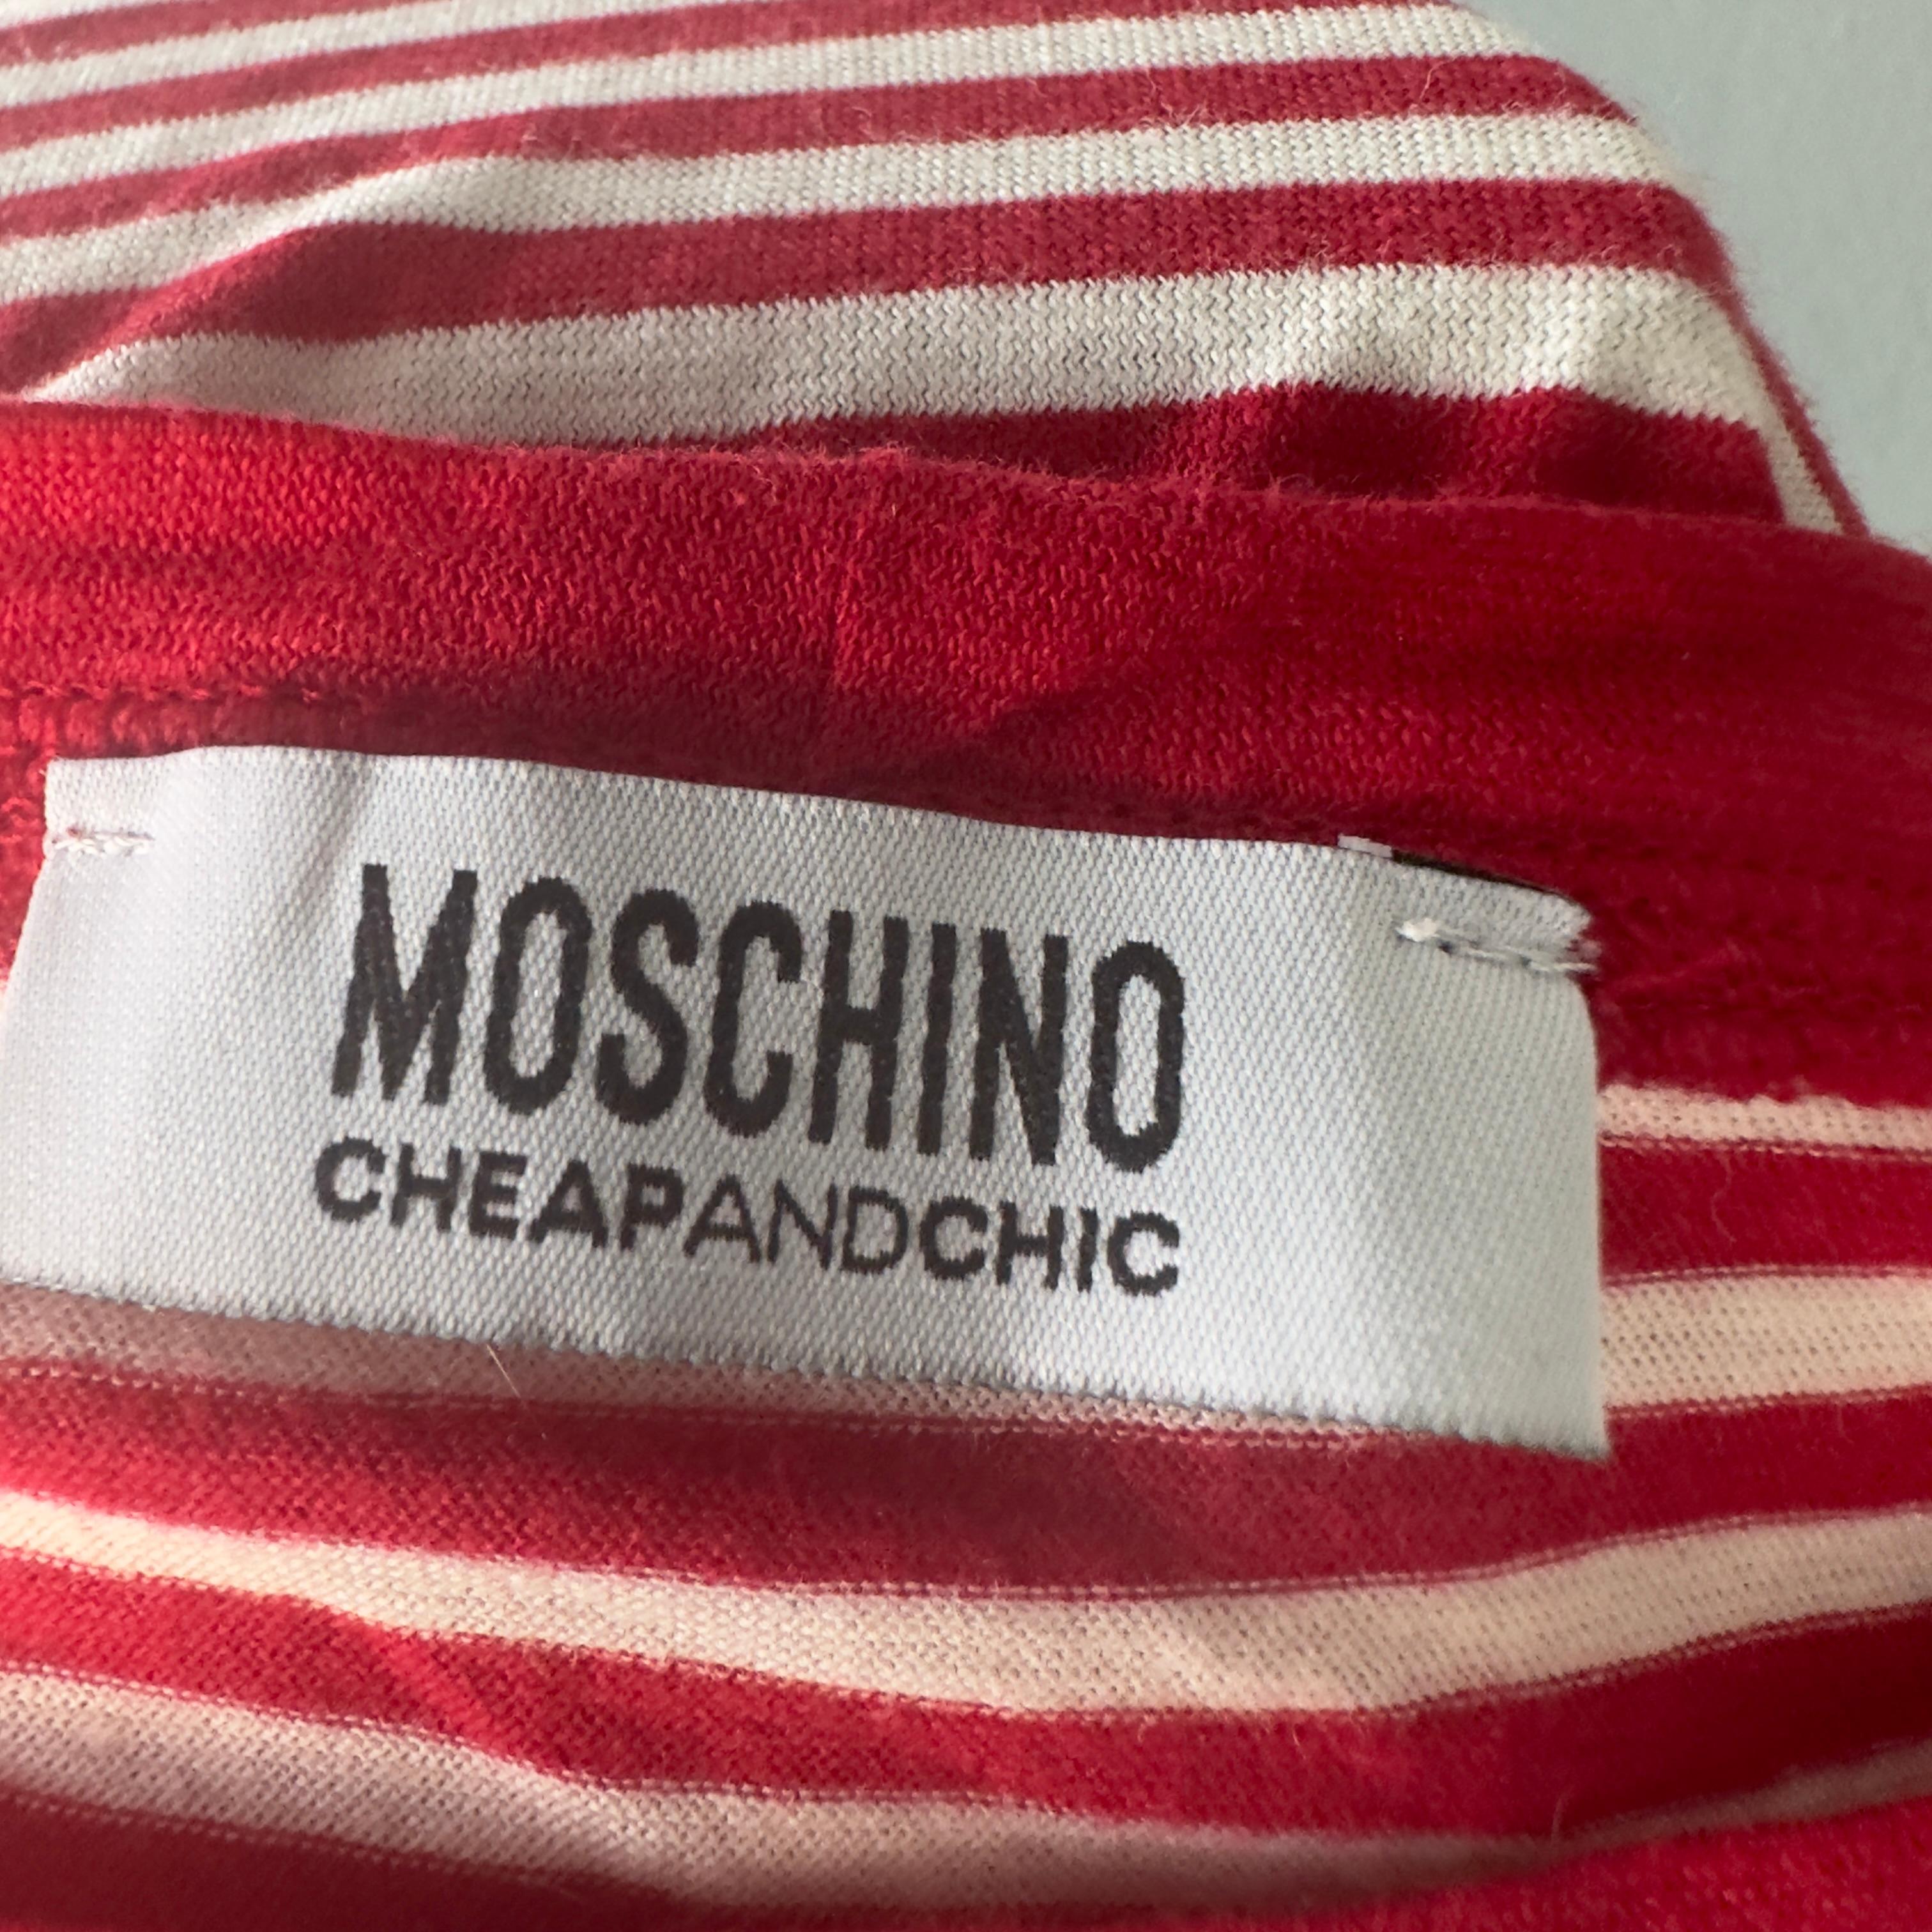 Moschino Cheap and Chic T-shirt For Sale 3